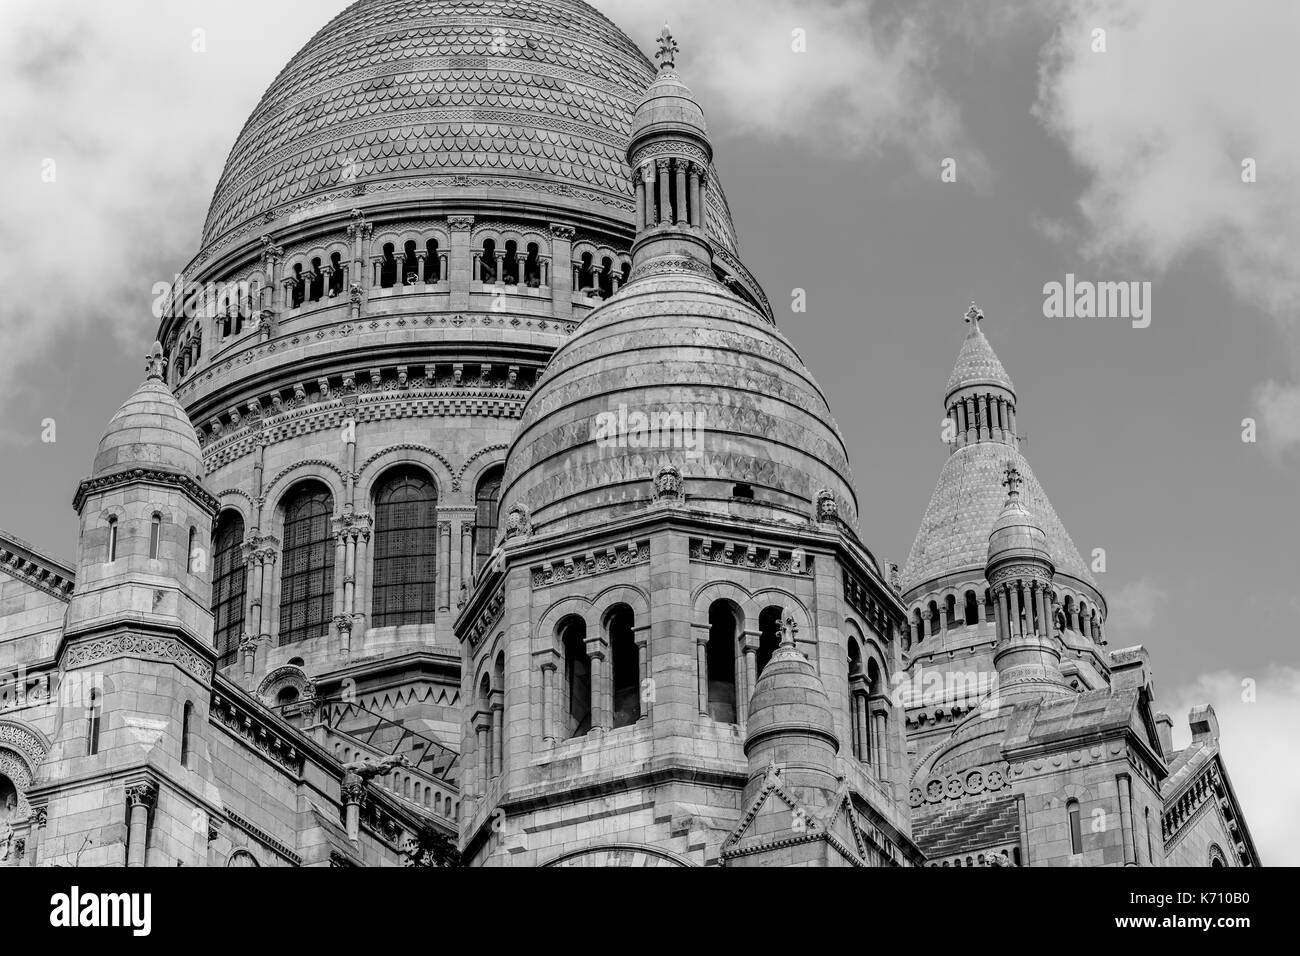 Close up View of the Dome of Sacre Coeur in Paris Stock Photo